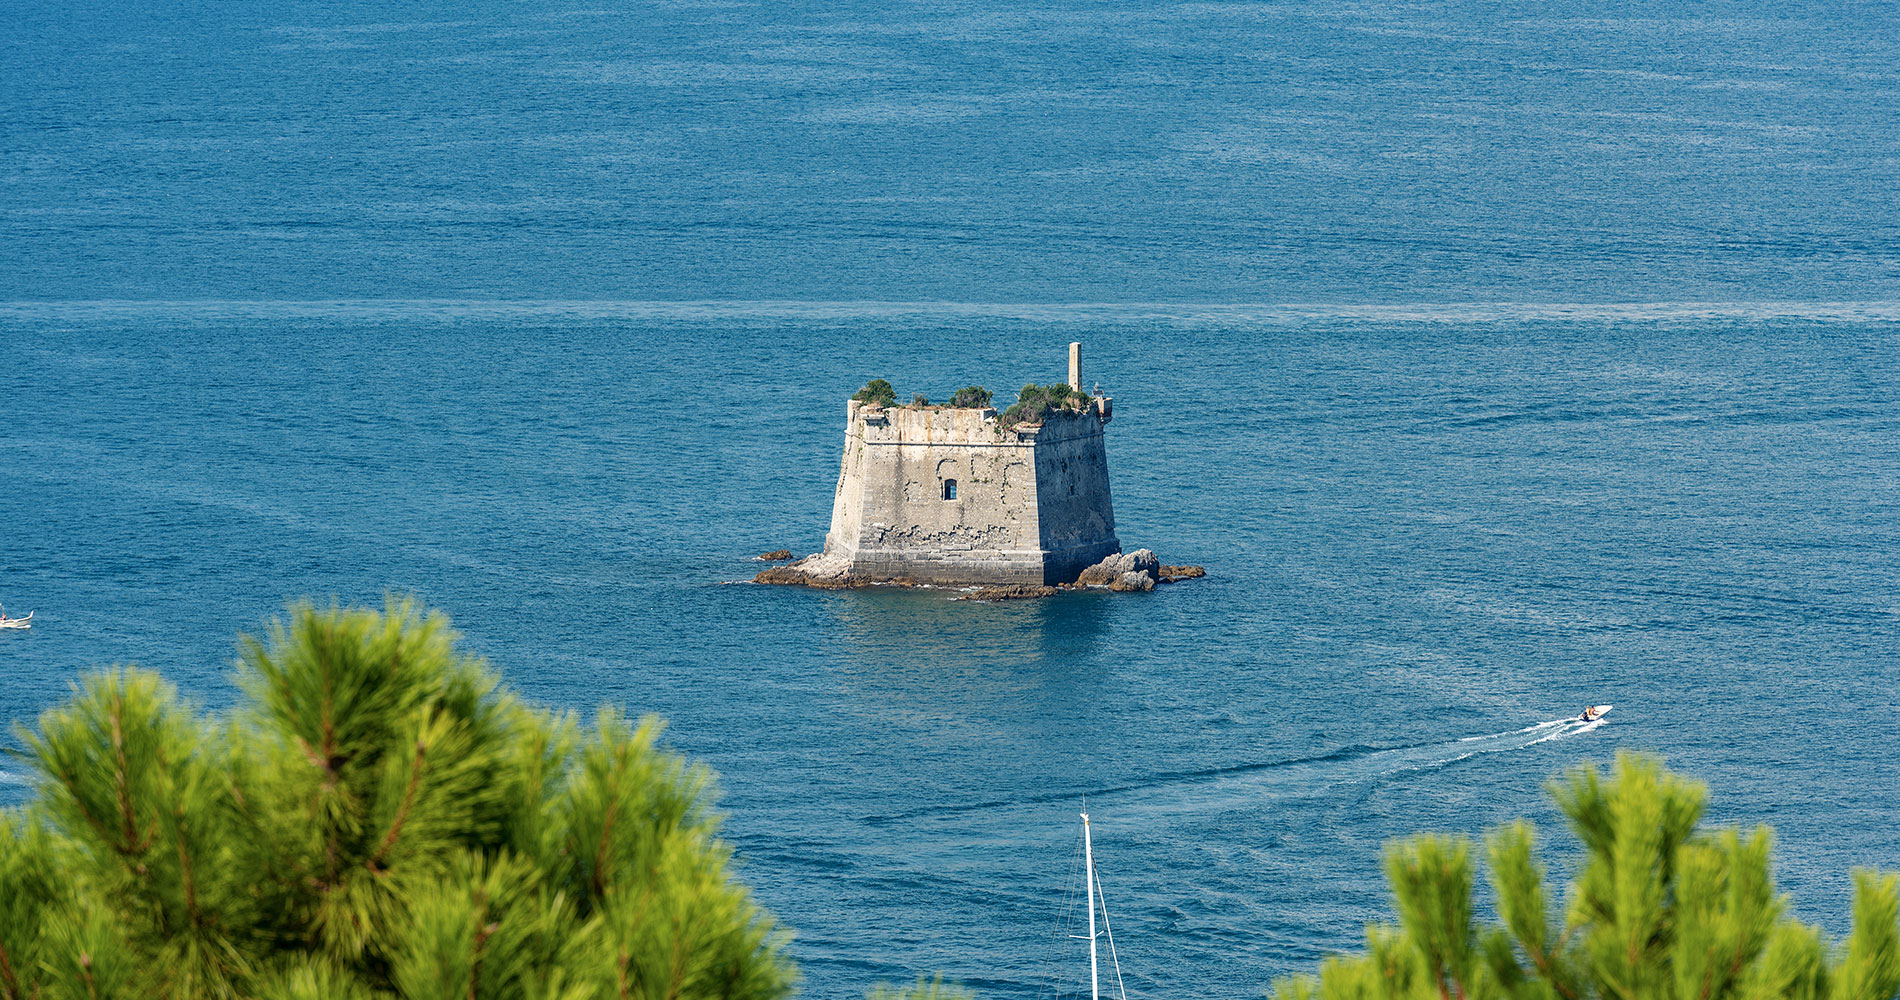 Photo of the Torre Scola positioned in the middle of the sea of the Gulf of Poets